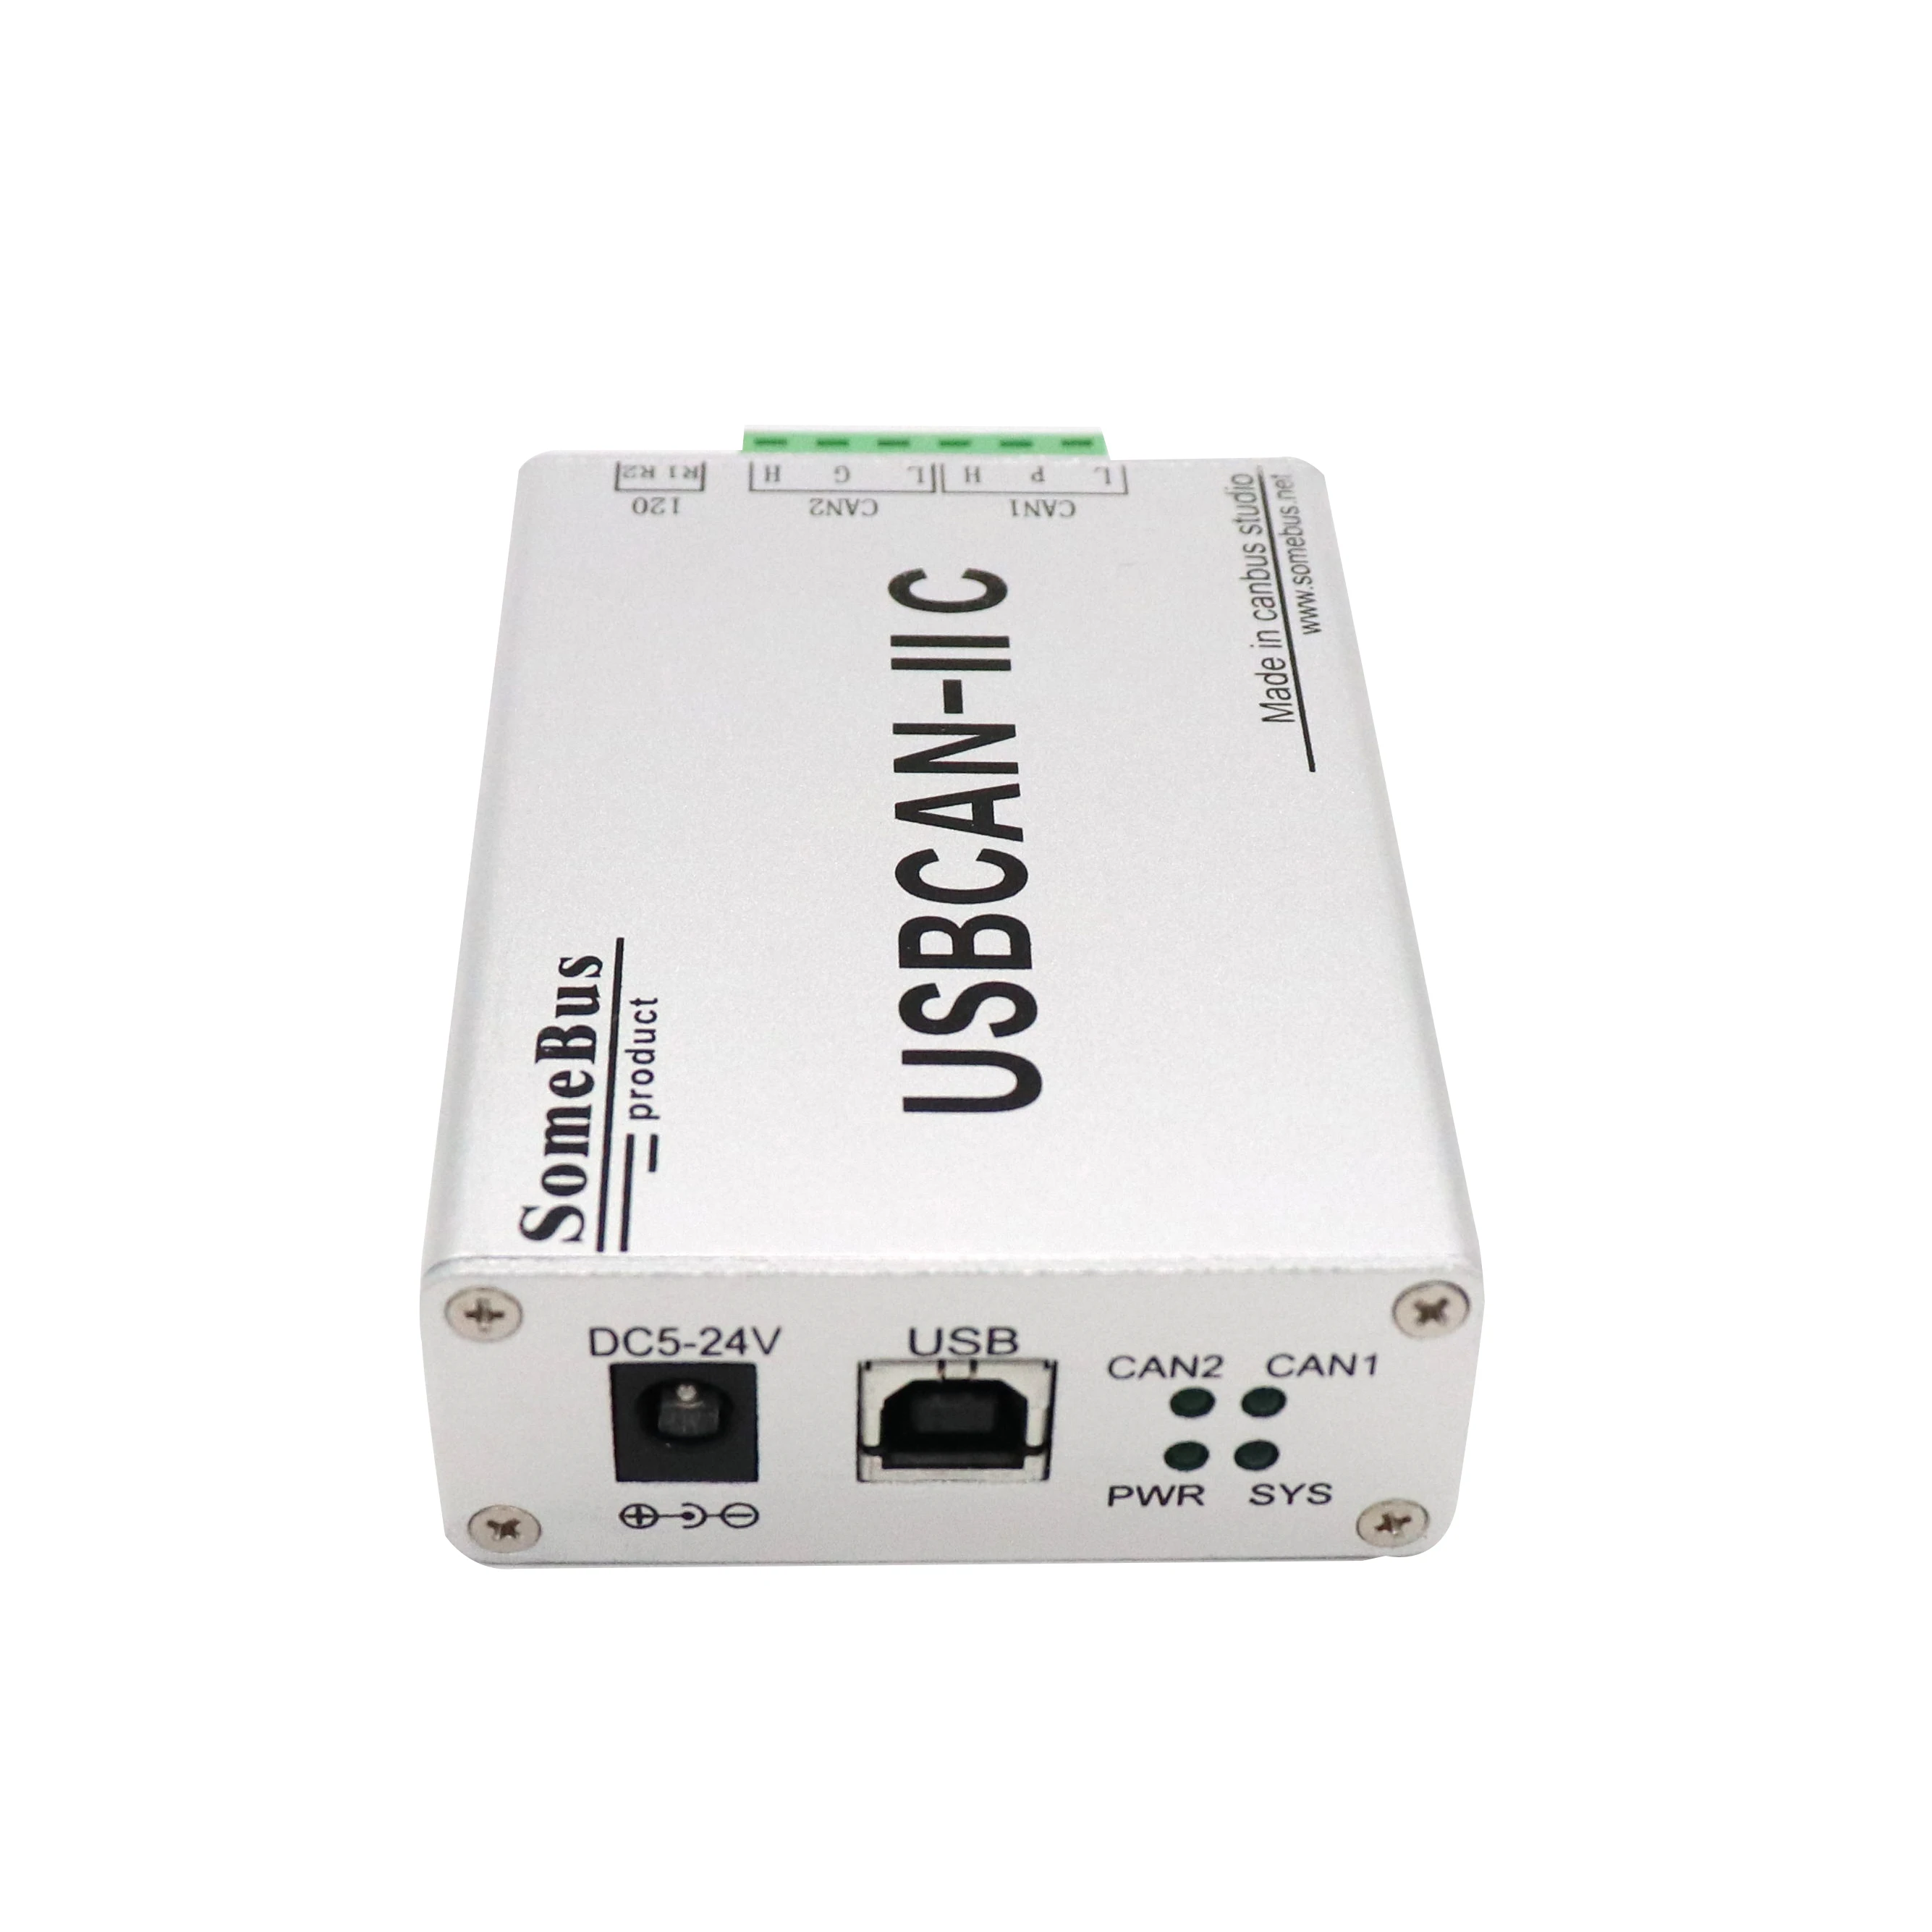 GCAN Industrial Grade Usb Can Bus Interface 2 Channel Usbcan Analyzer Converter Adapter Module Cable With Colorful Box